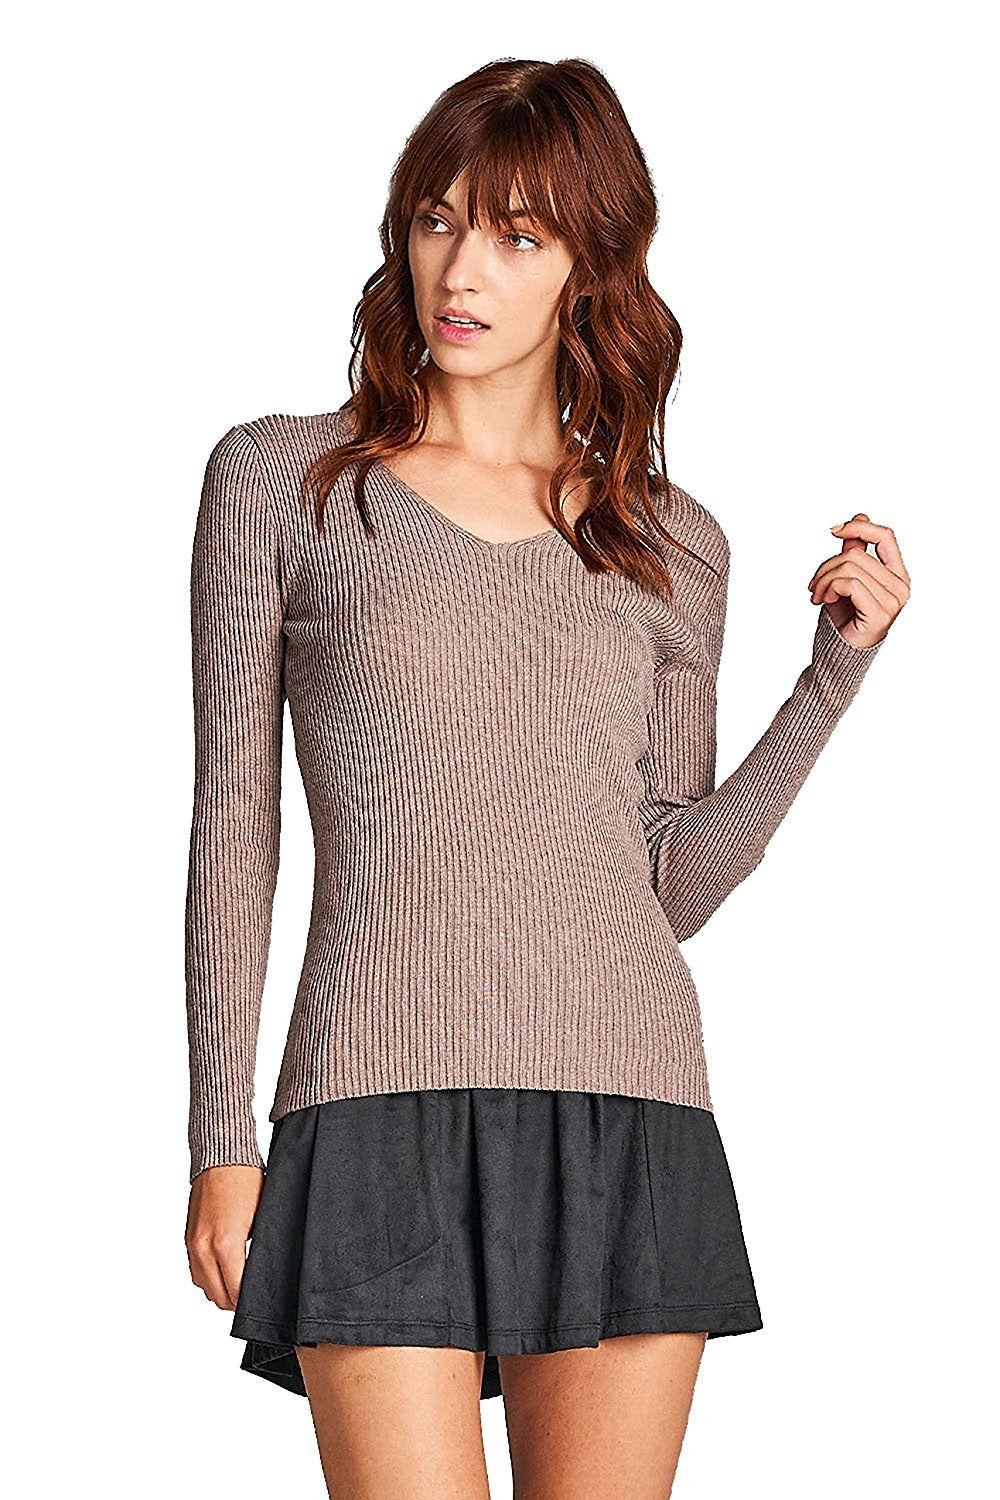 Khanomak Plain Solid Stretch Fitted Long Sleeve V Neck Ribbed Knit Lightweight Sweater Top